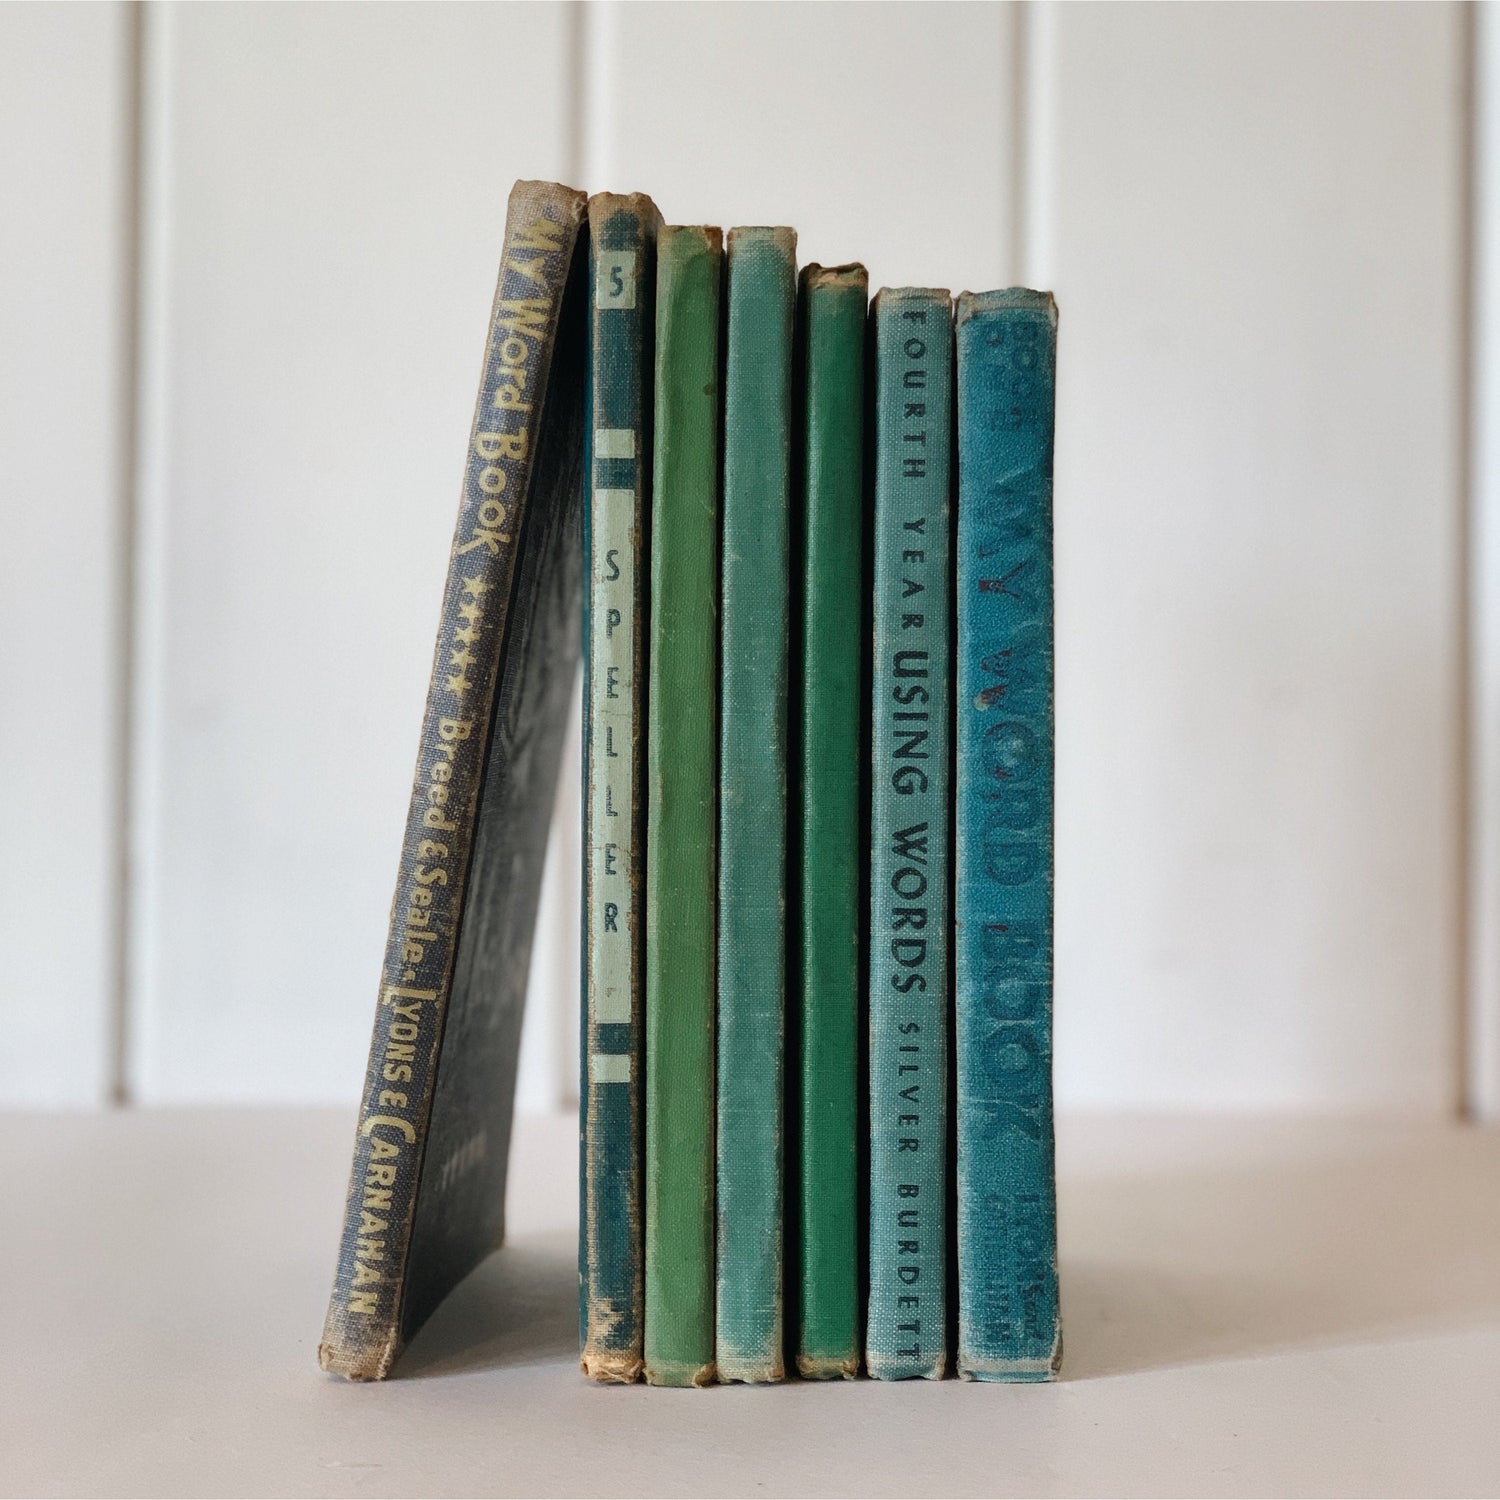 Vintage Spelling Textbook Set, Blue and Green Book Set for Classroom Decor